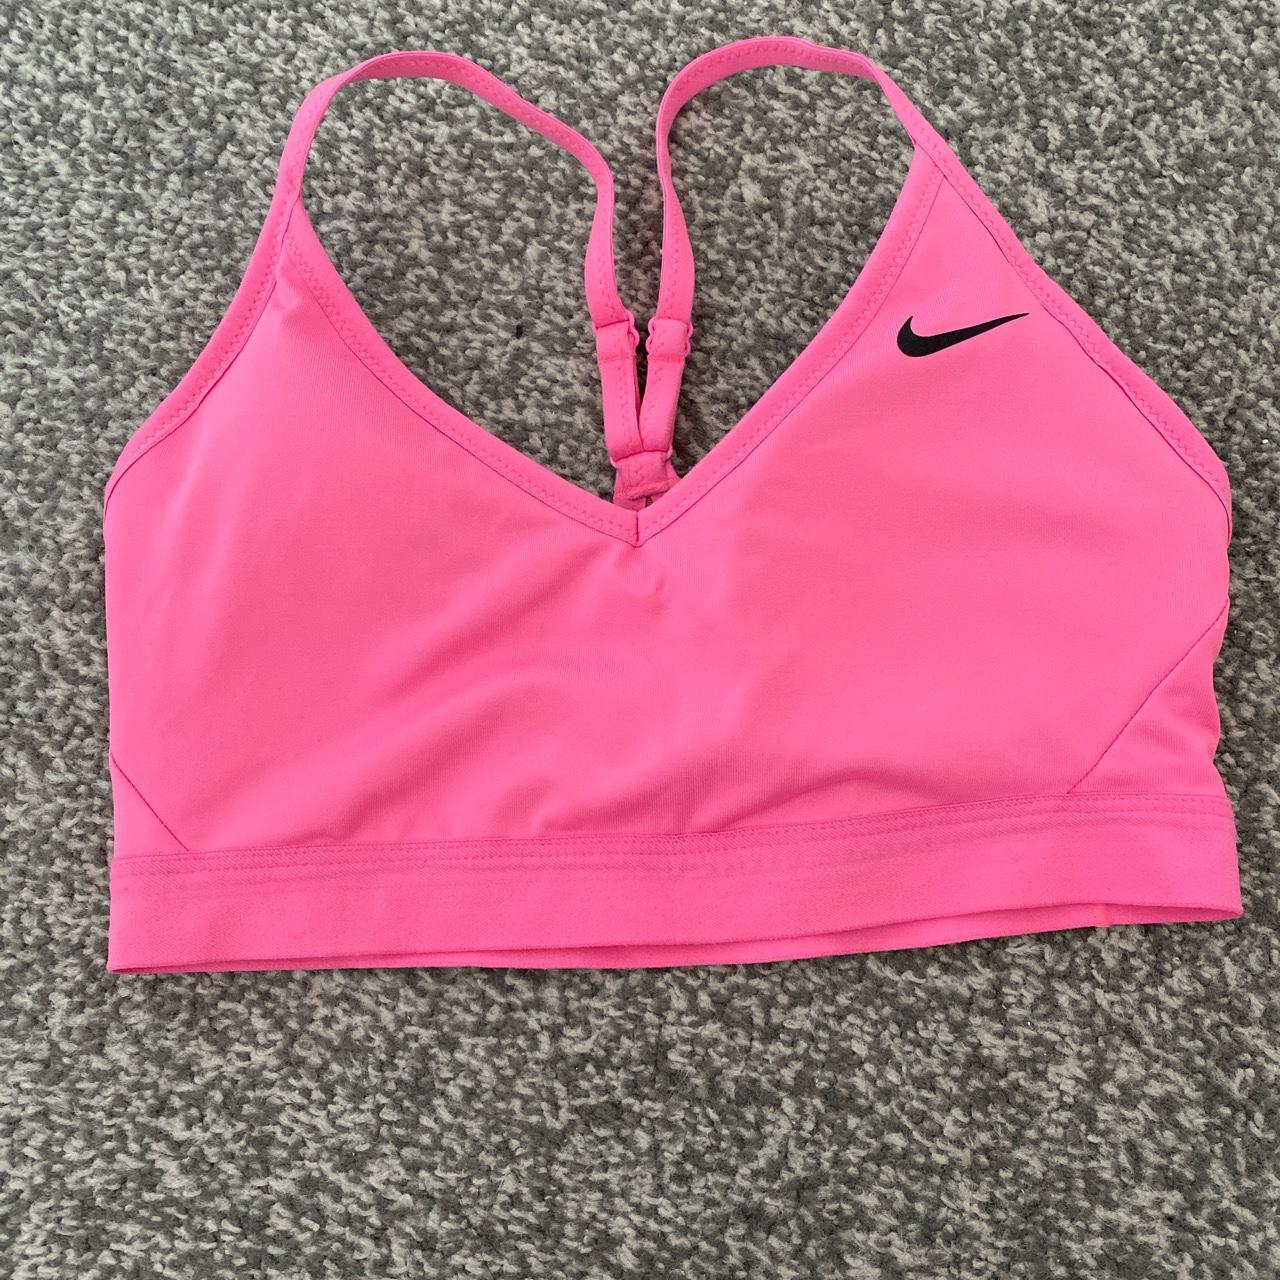 The brassiere pink Nike worn by Sissy Mua on his account Instagram